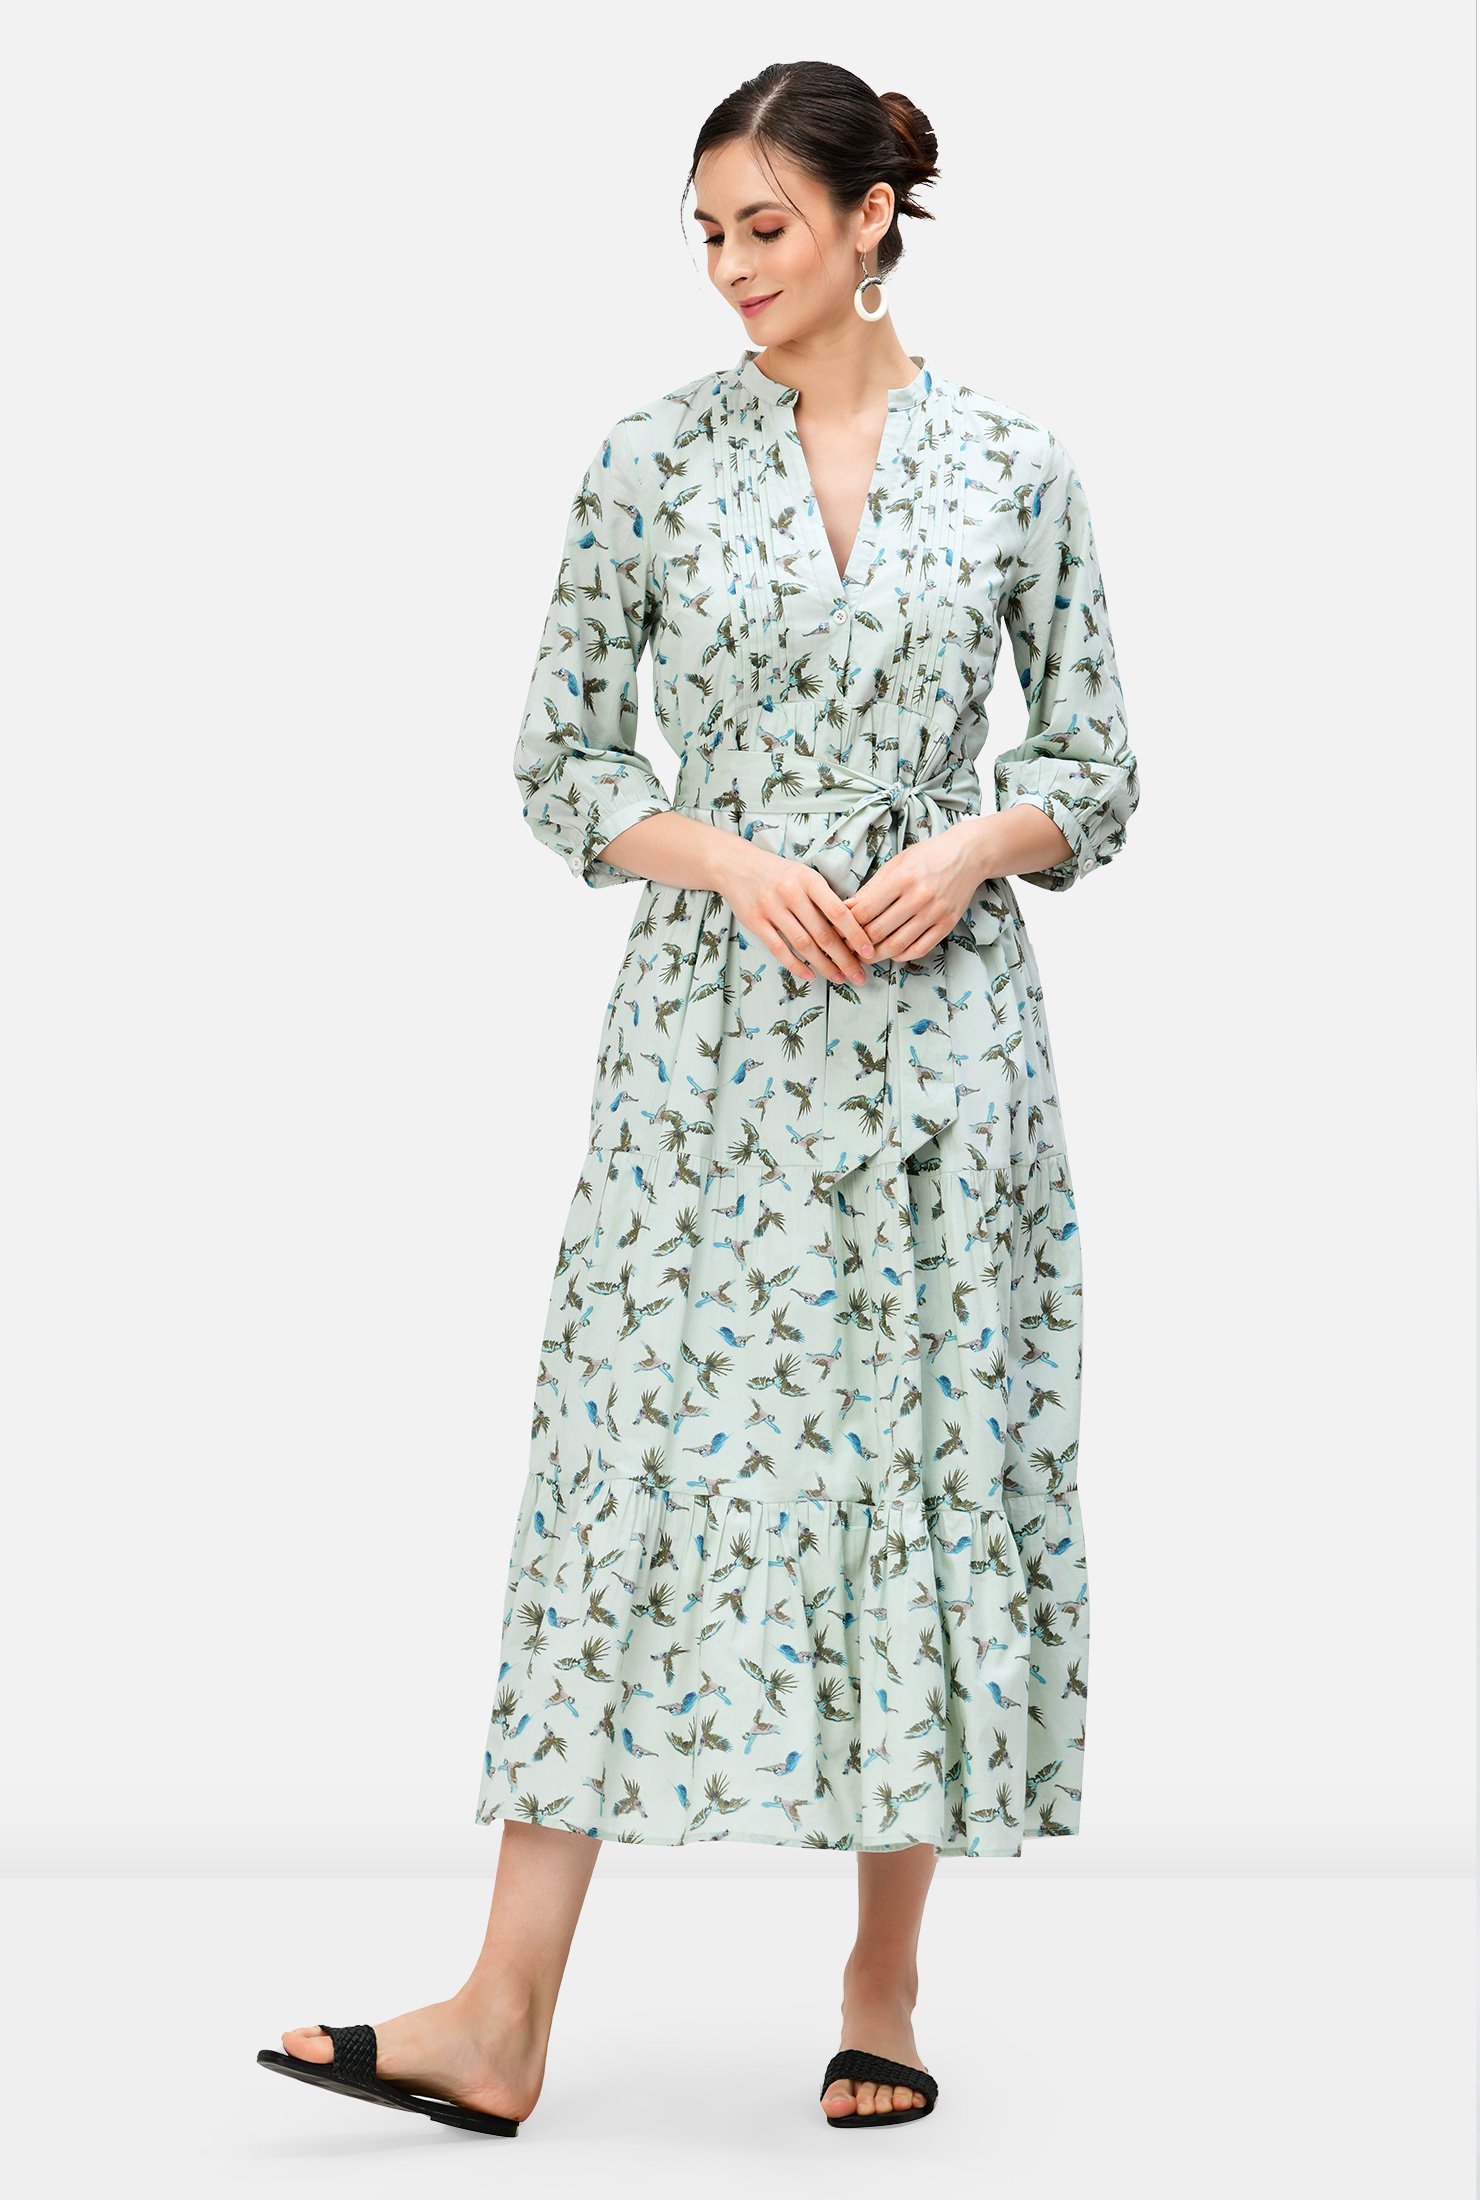 Bird flight! Our light and lovely cotton cambric dress with a fresh print and an airy silhouette features a pintuck-pleat empire bodice, swingy ruched tier full skirt and an optional self-sash-tie belt.